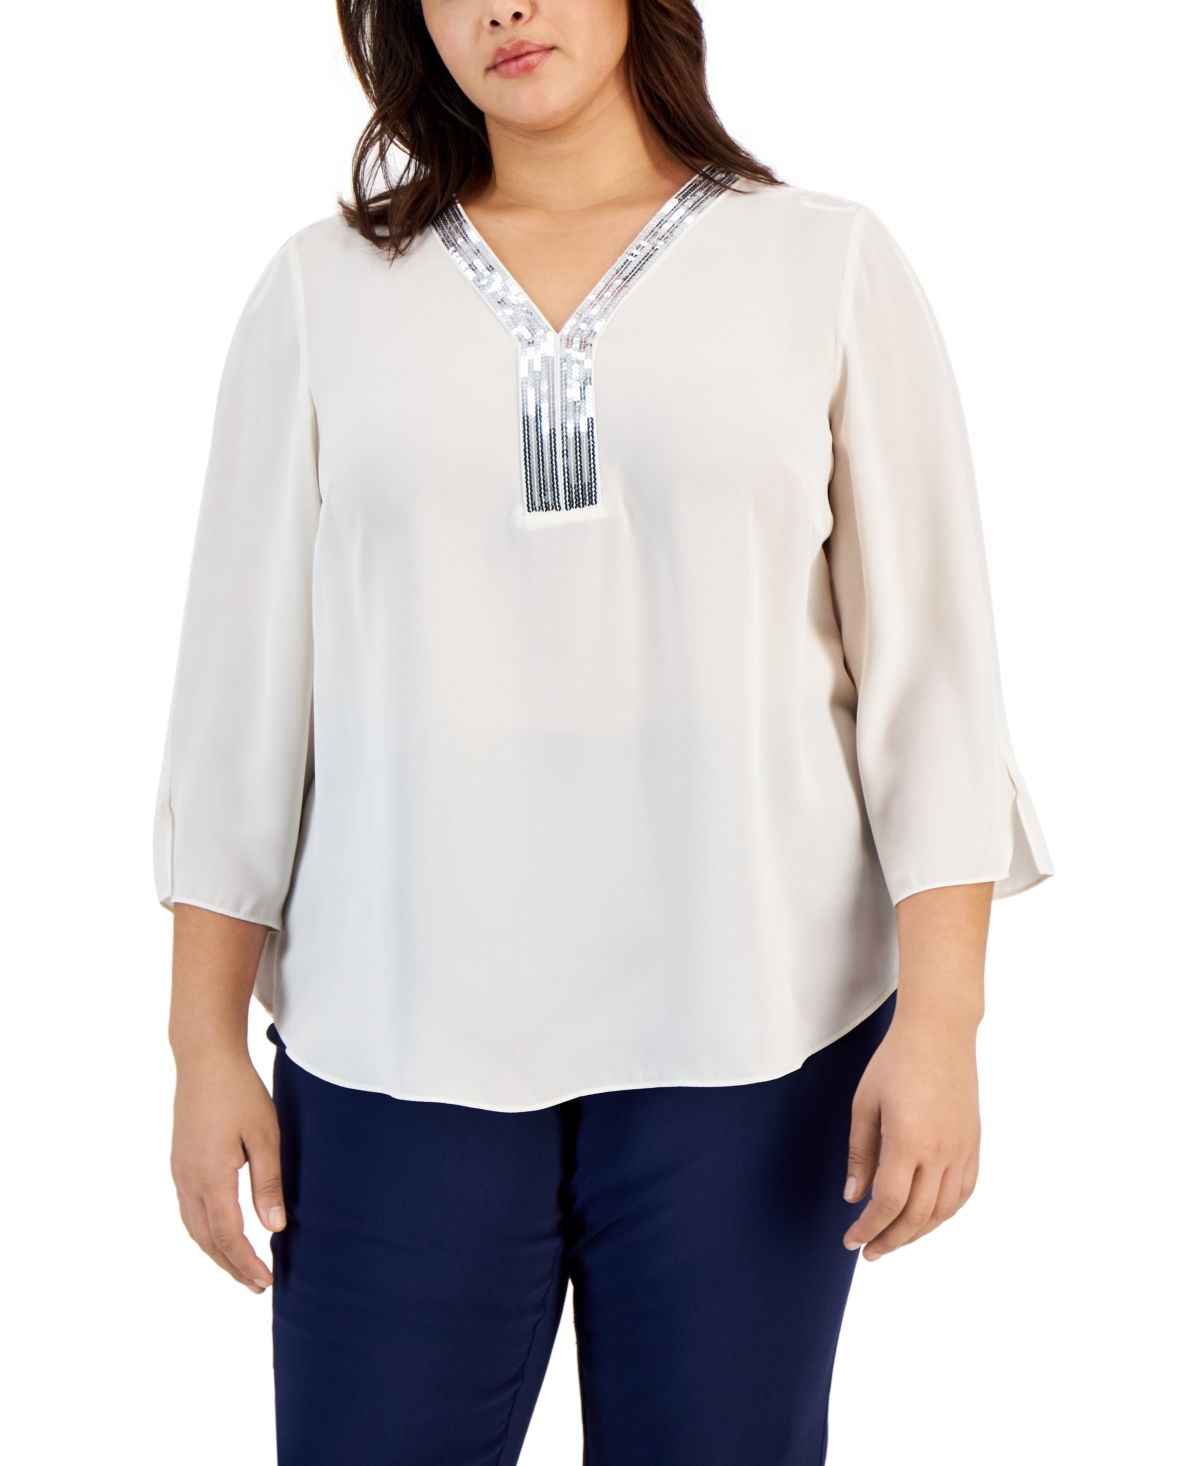 Jm Collection Plus Size Printed Swing Top, Created for Macy's - Dark Rust  Combo